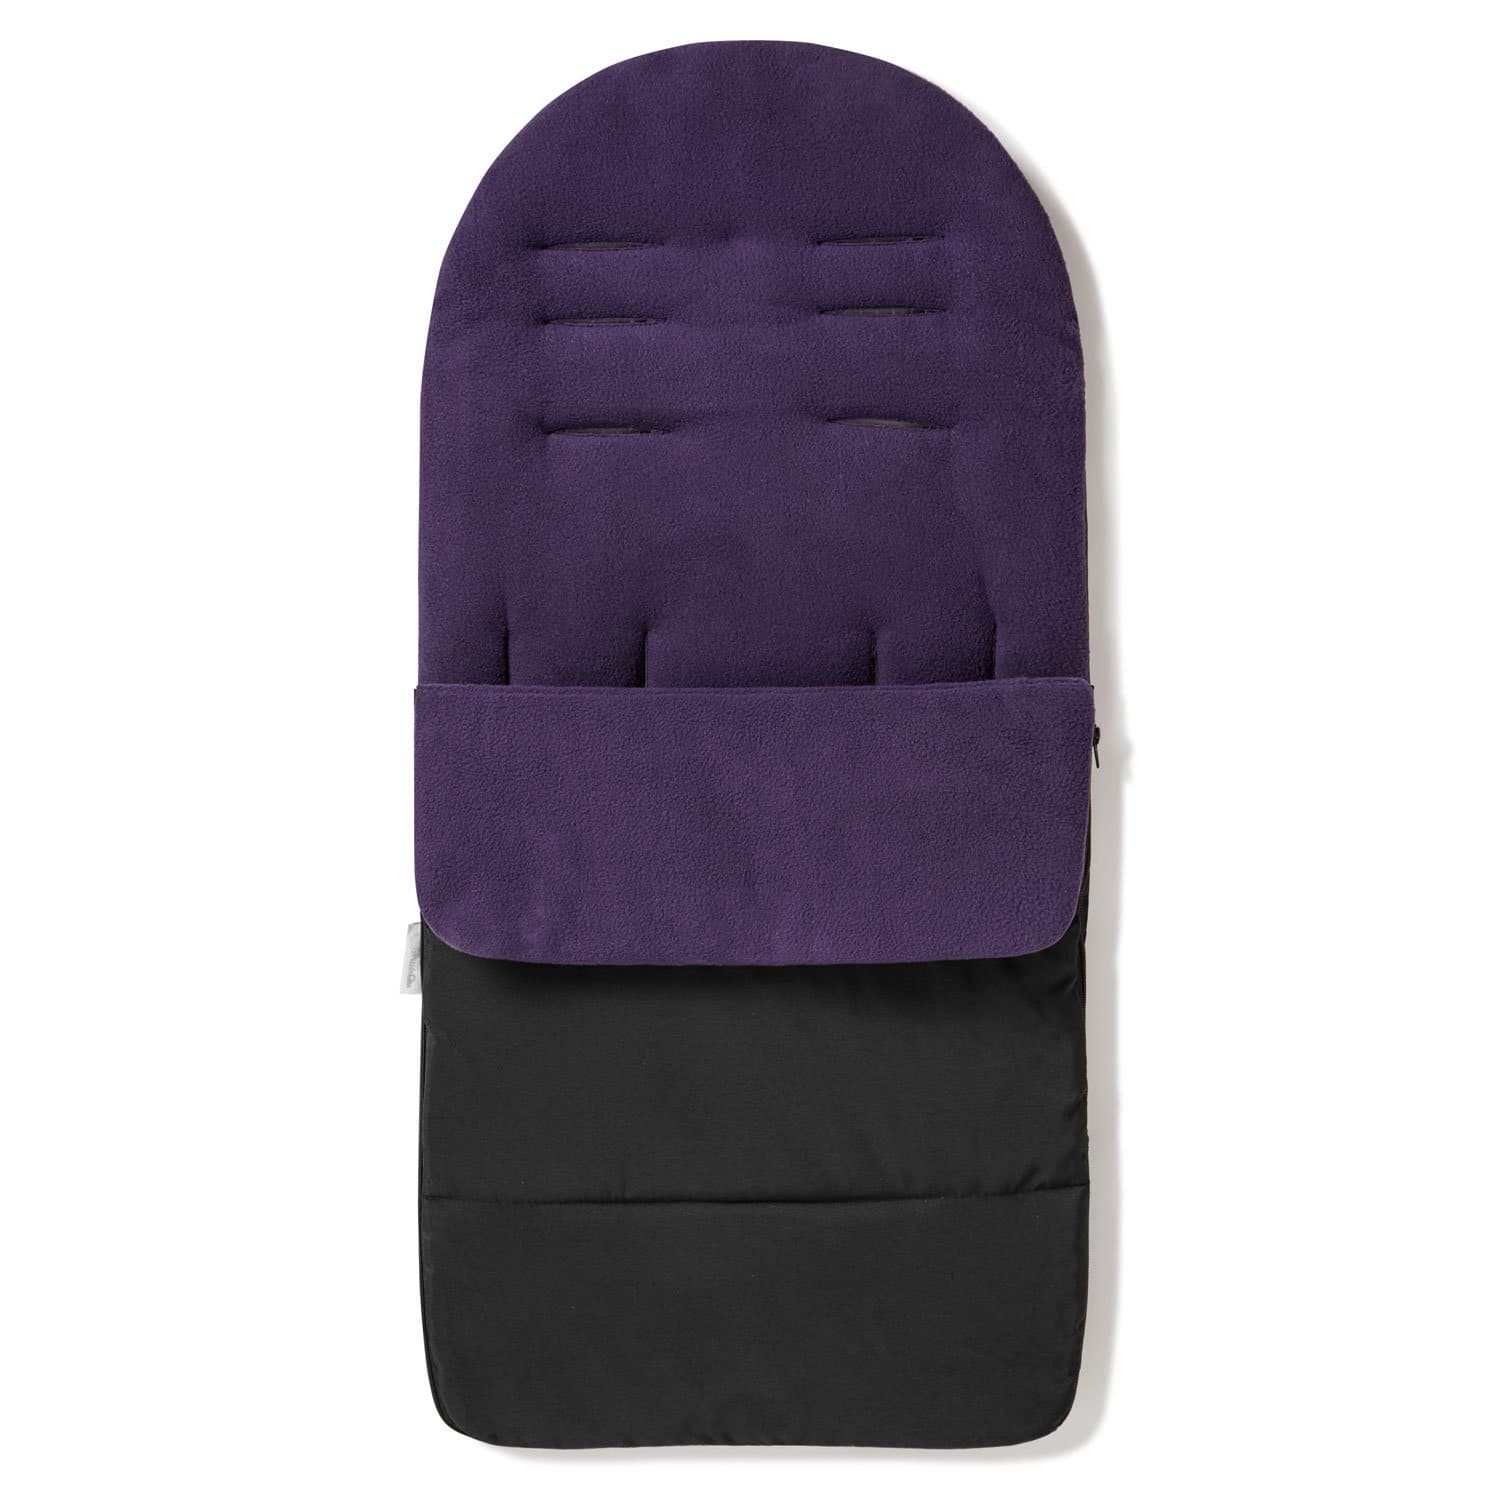 Premium Footmuff / Cosy Toes Compatible with Roma - Plum Purple / Fits All Models | For Your Little One